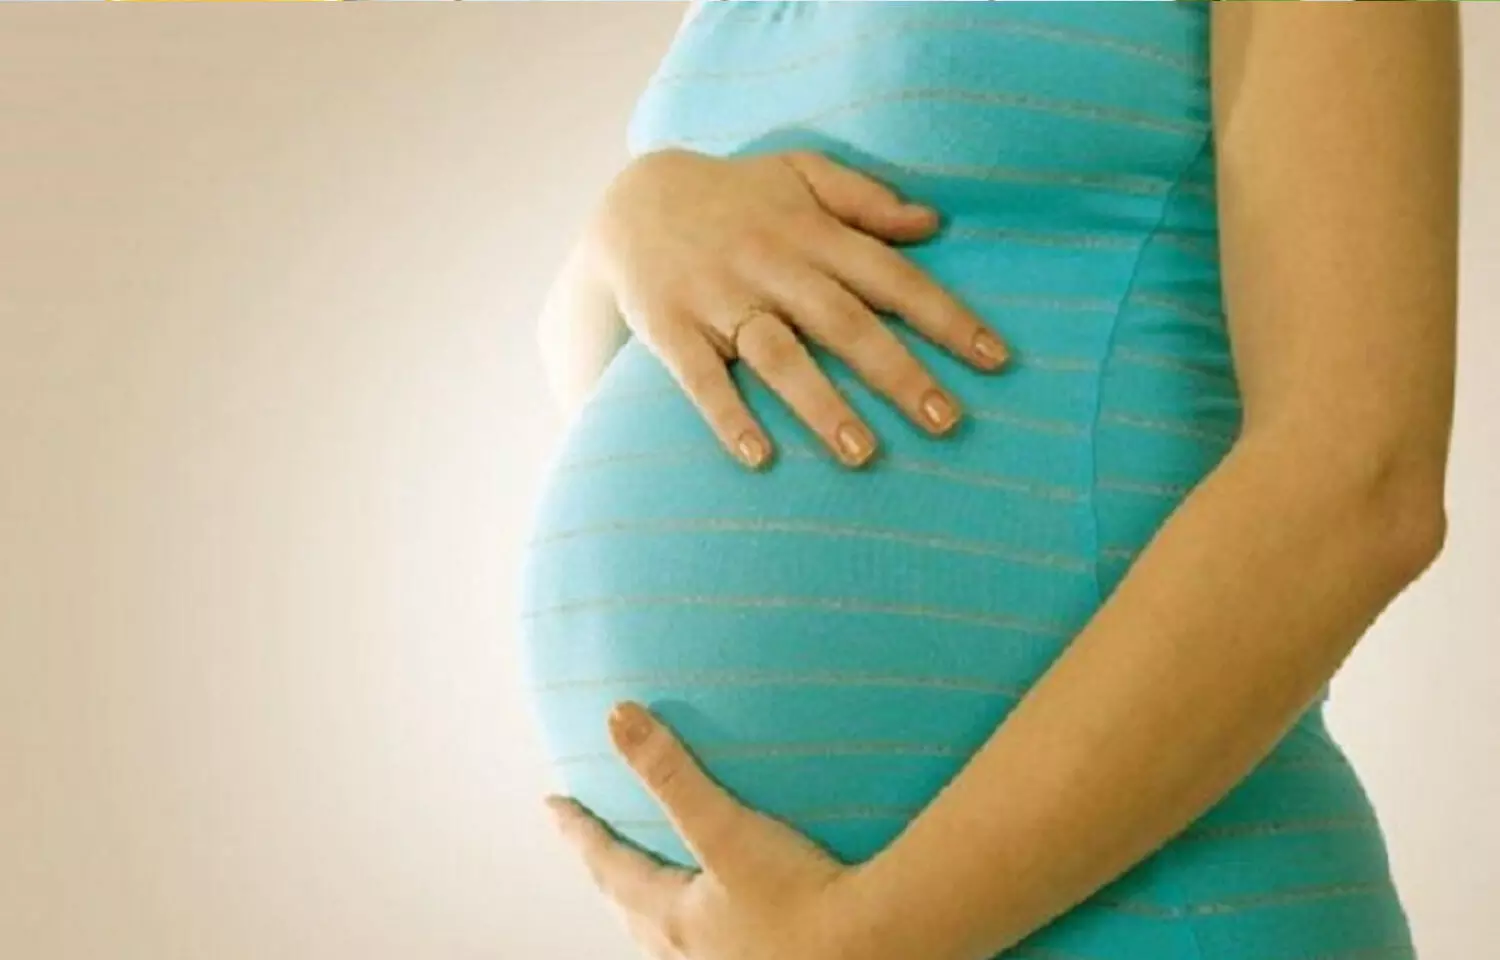 Pregnant women pass along protective COVID antibodies to their babies: ACOG study